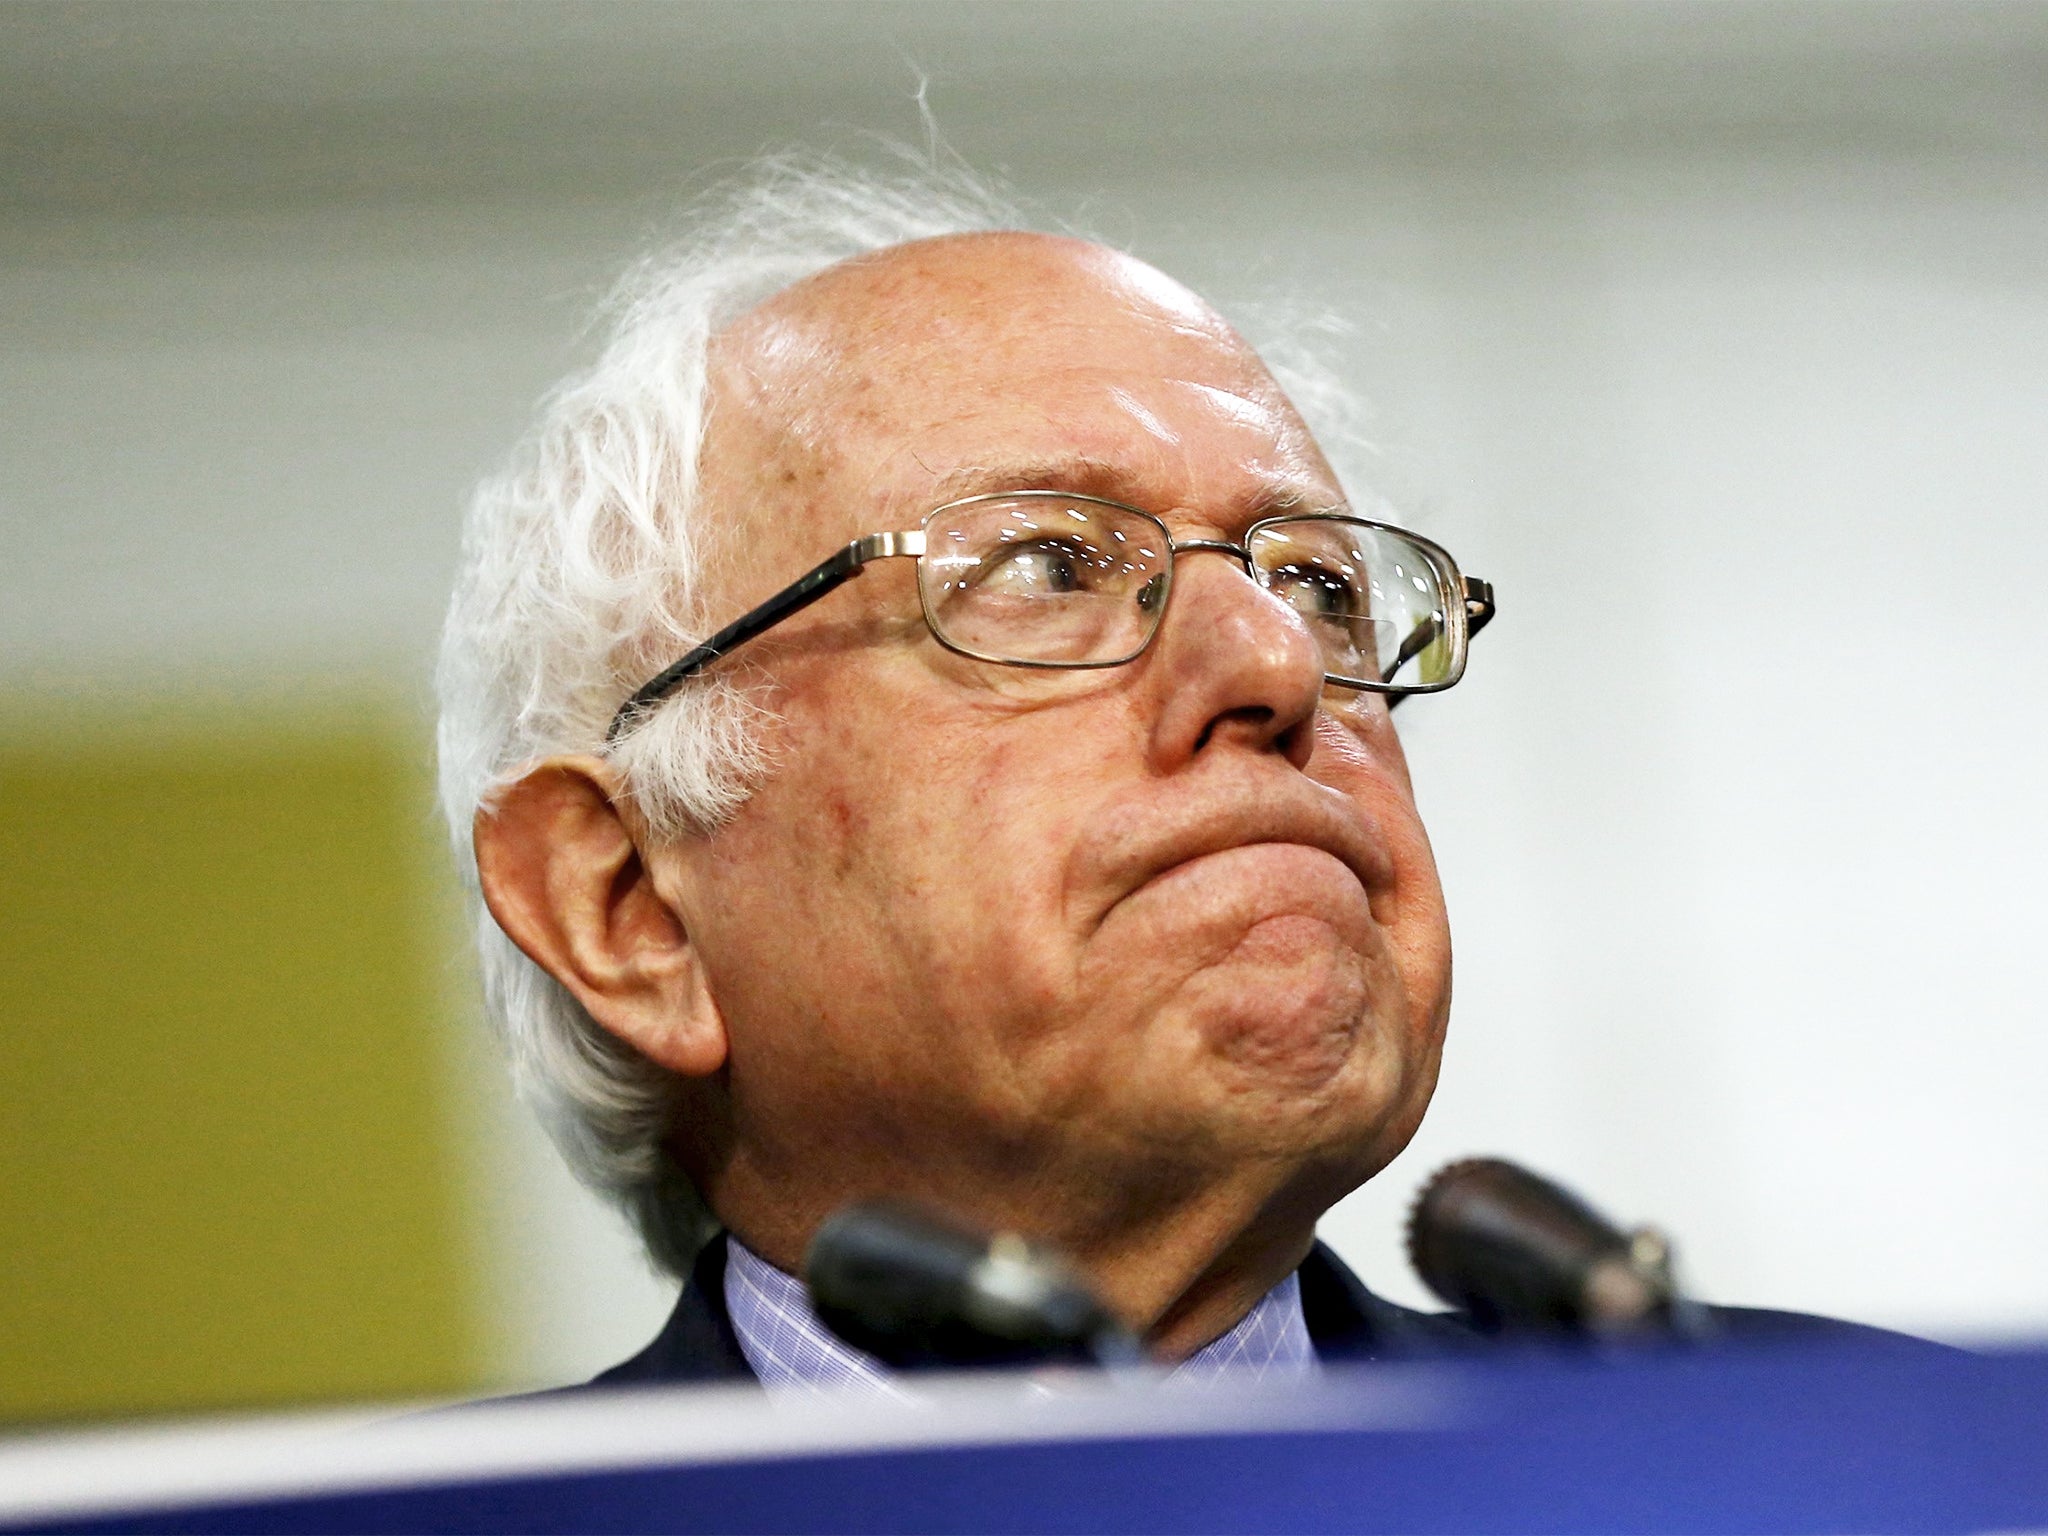 Bernie Sanders is holding his ground and still hopes to secure the Democratic nomination